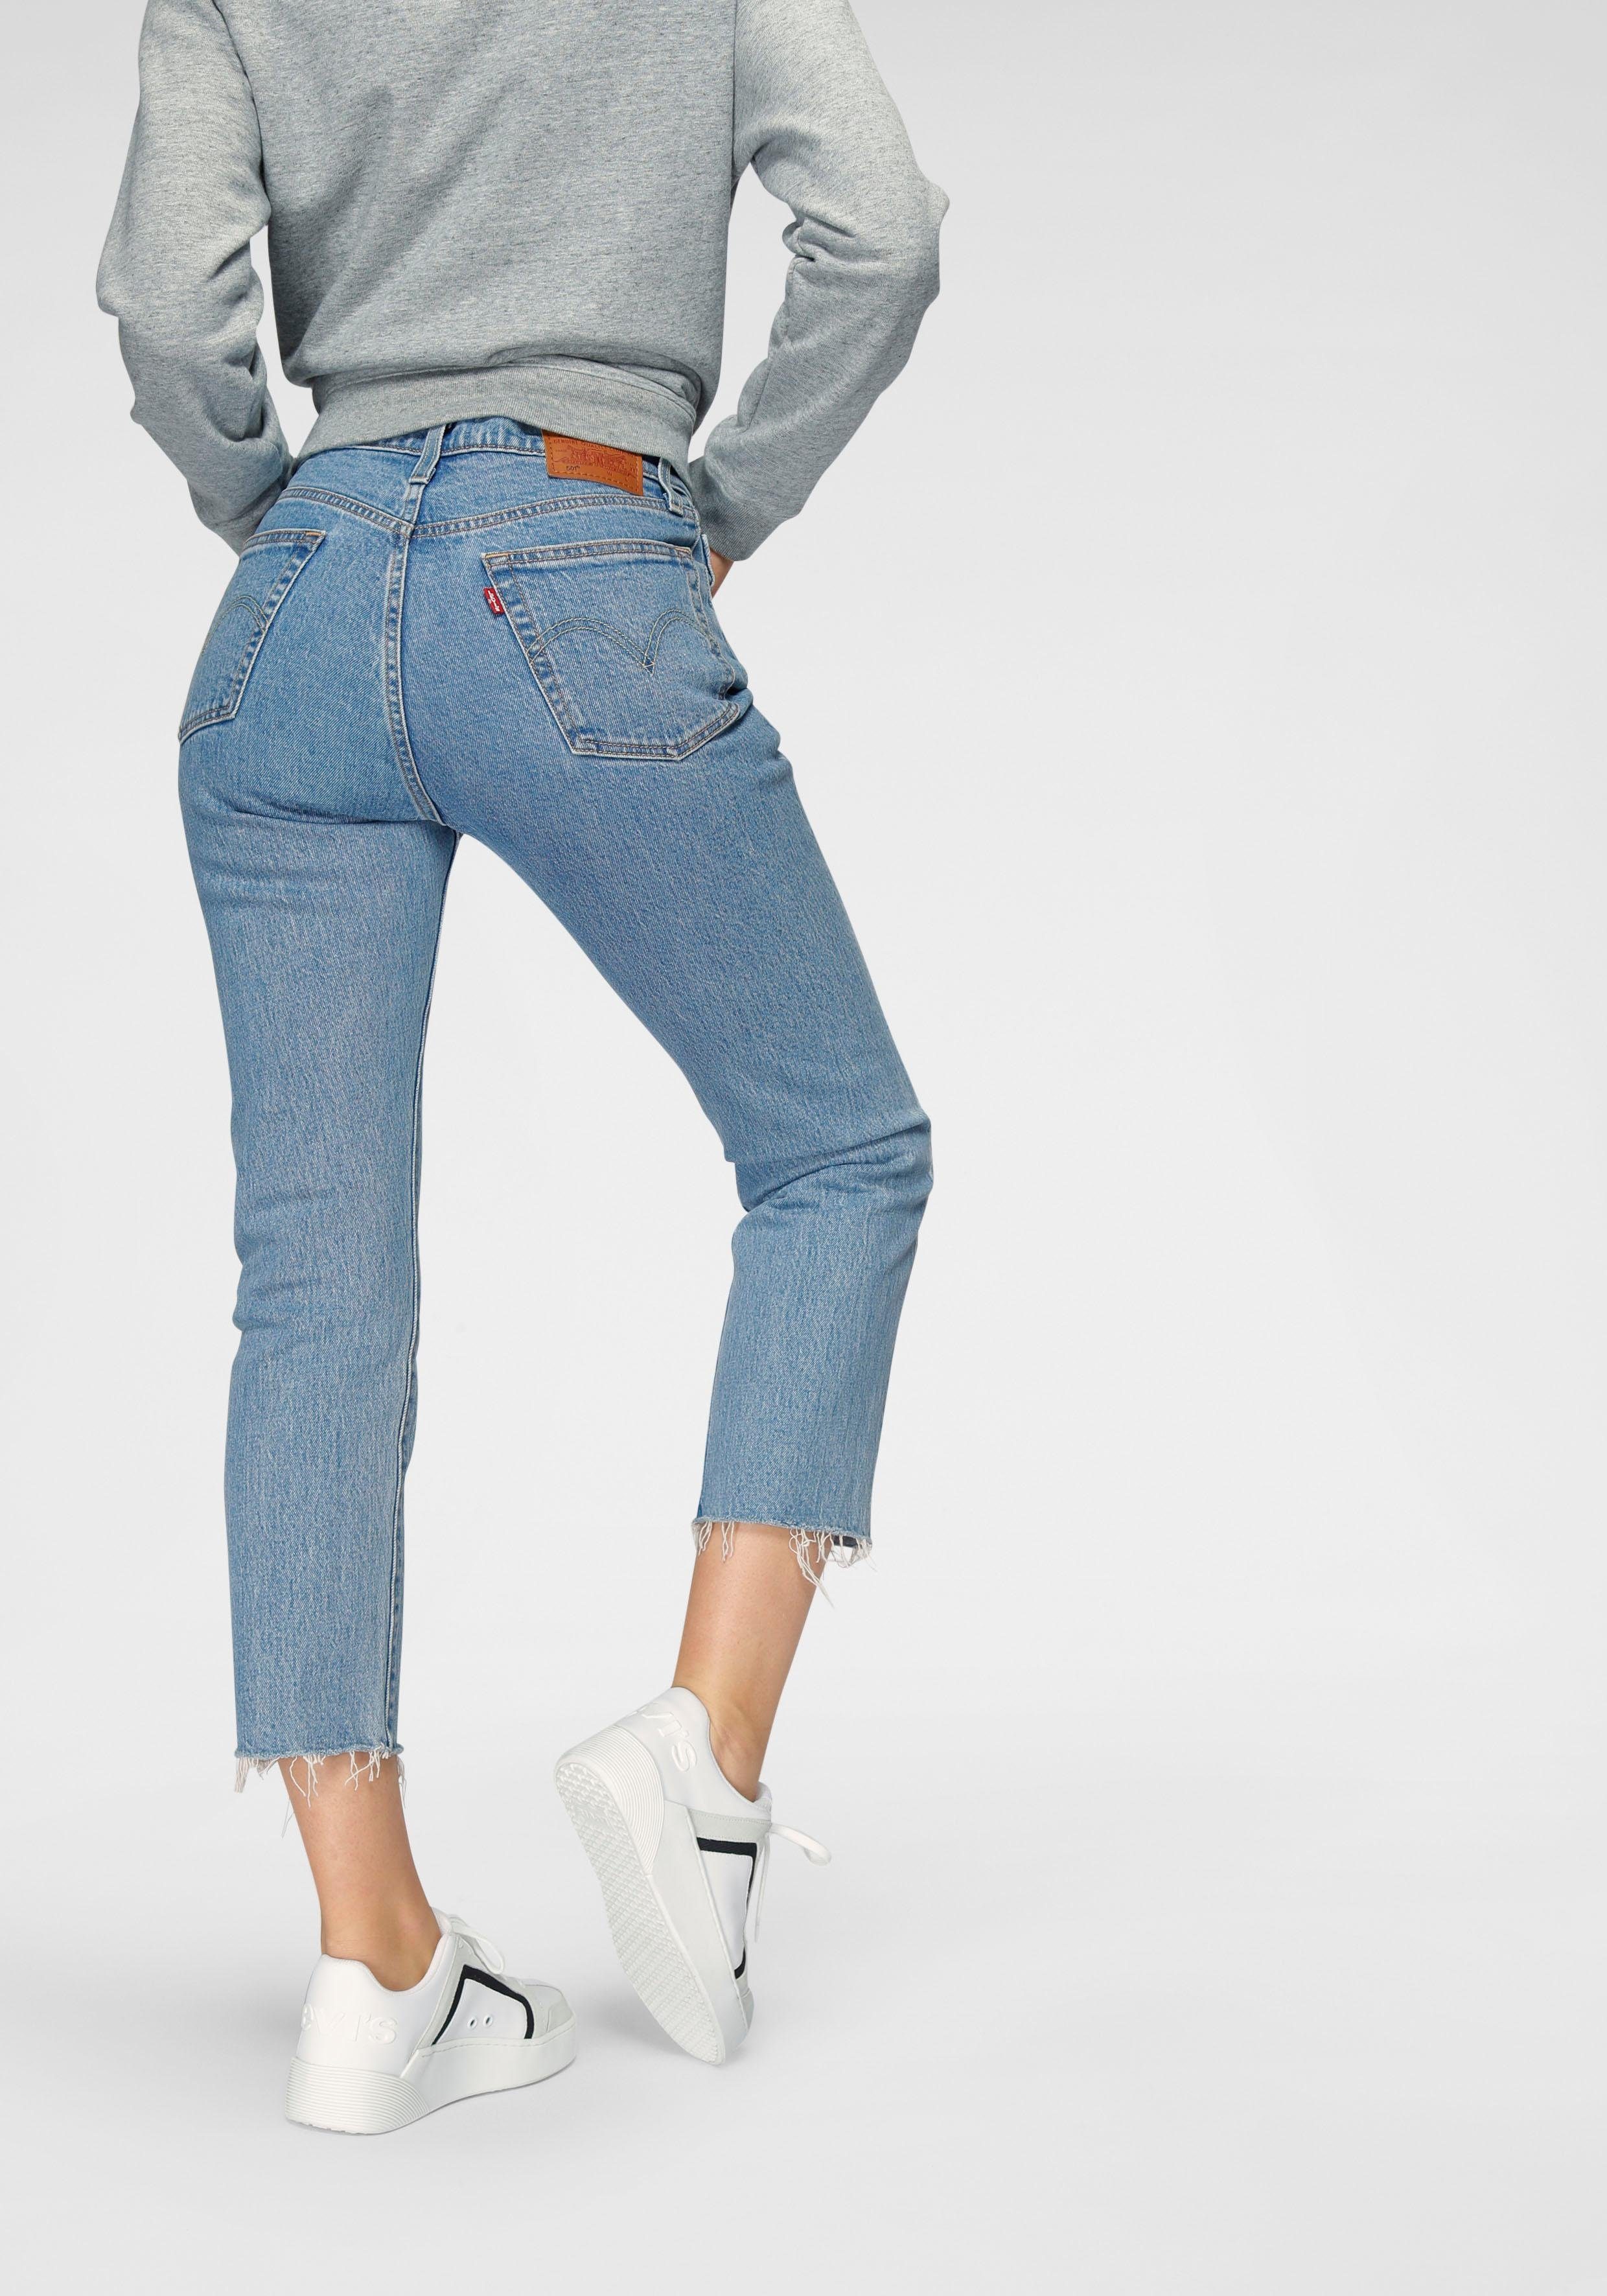 Levi's 501 Crop Jeans With Frayed Hem In Blue Lyst, 46% OFF